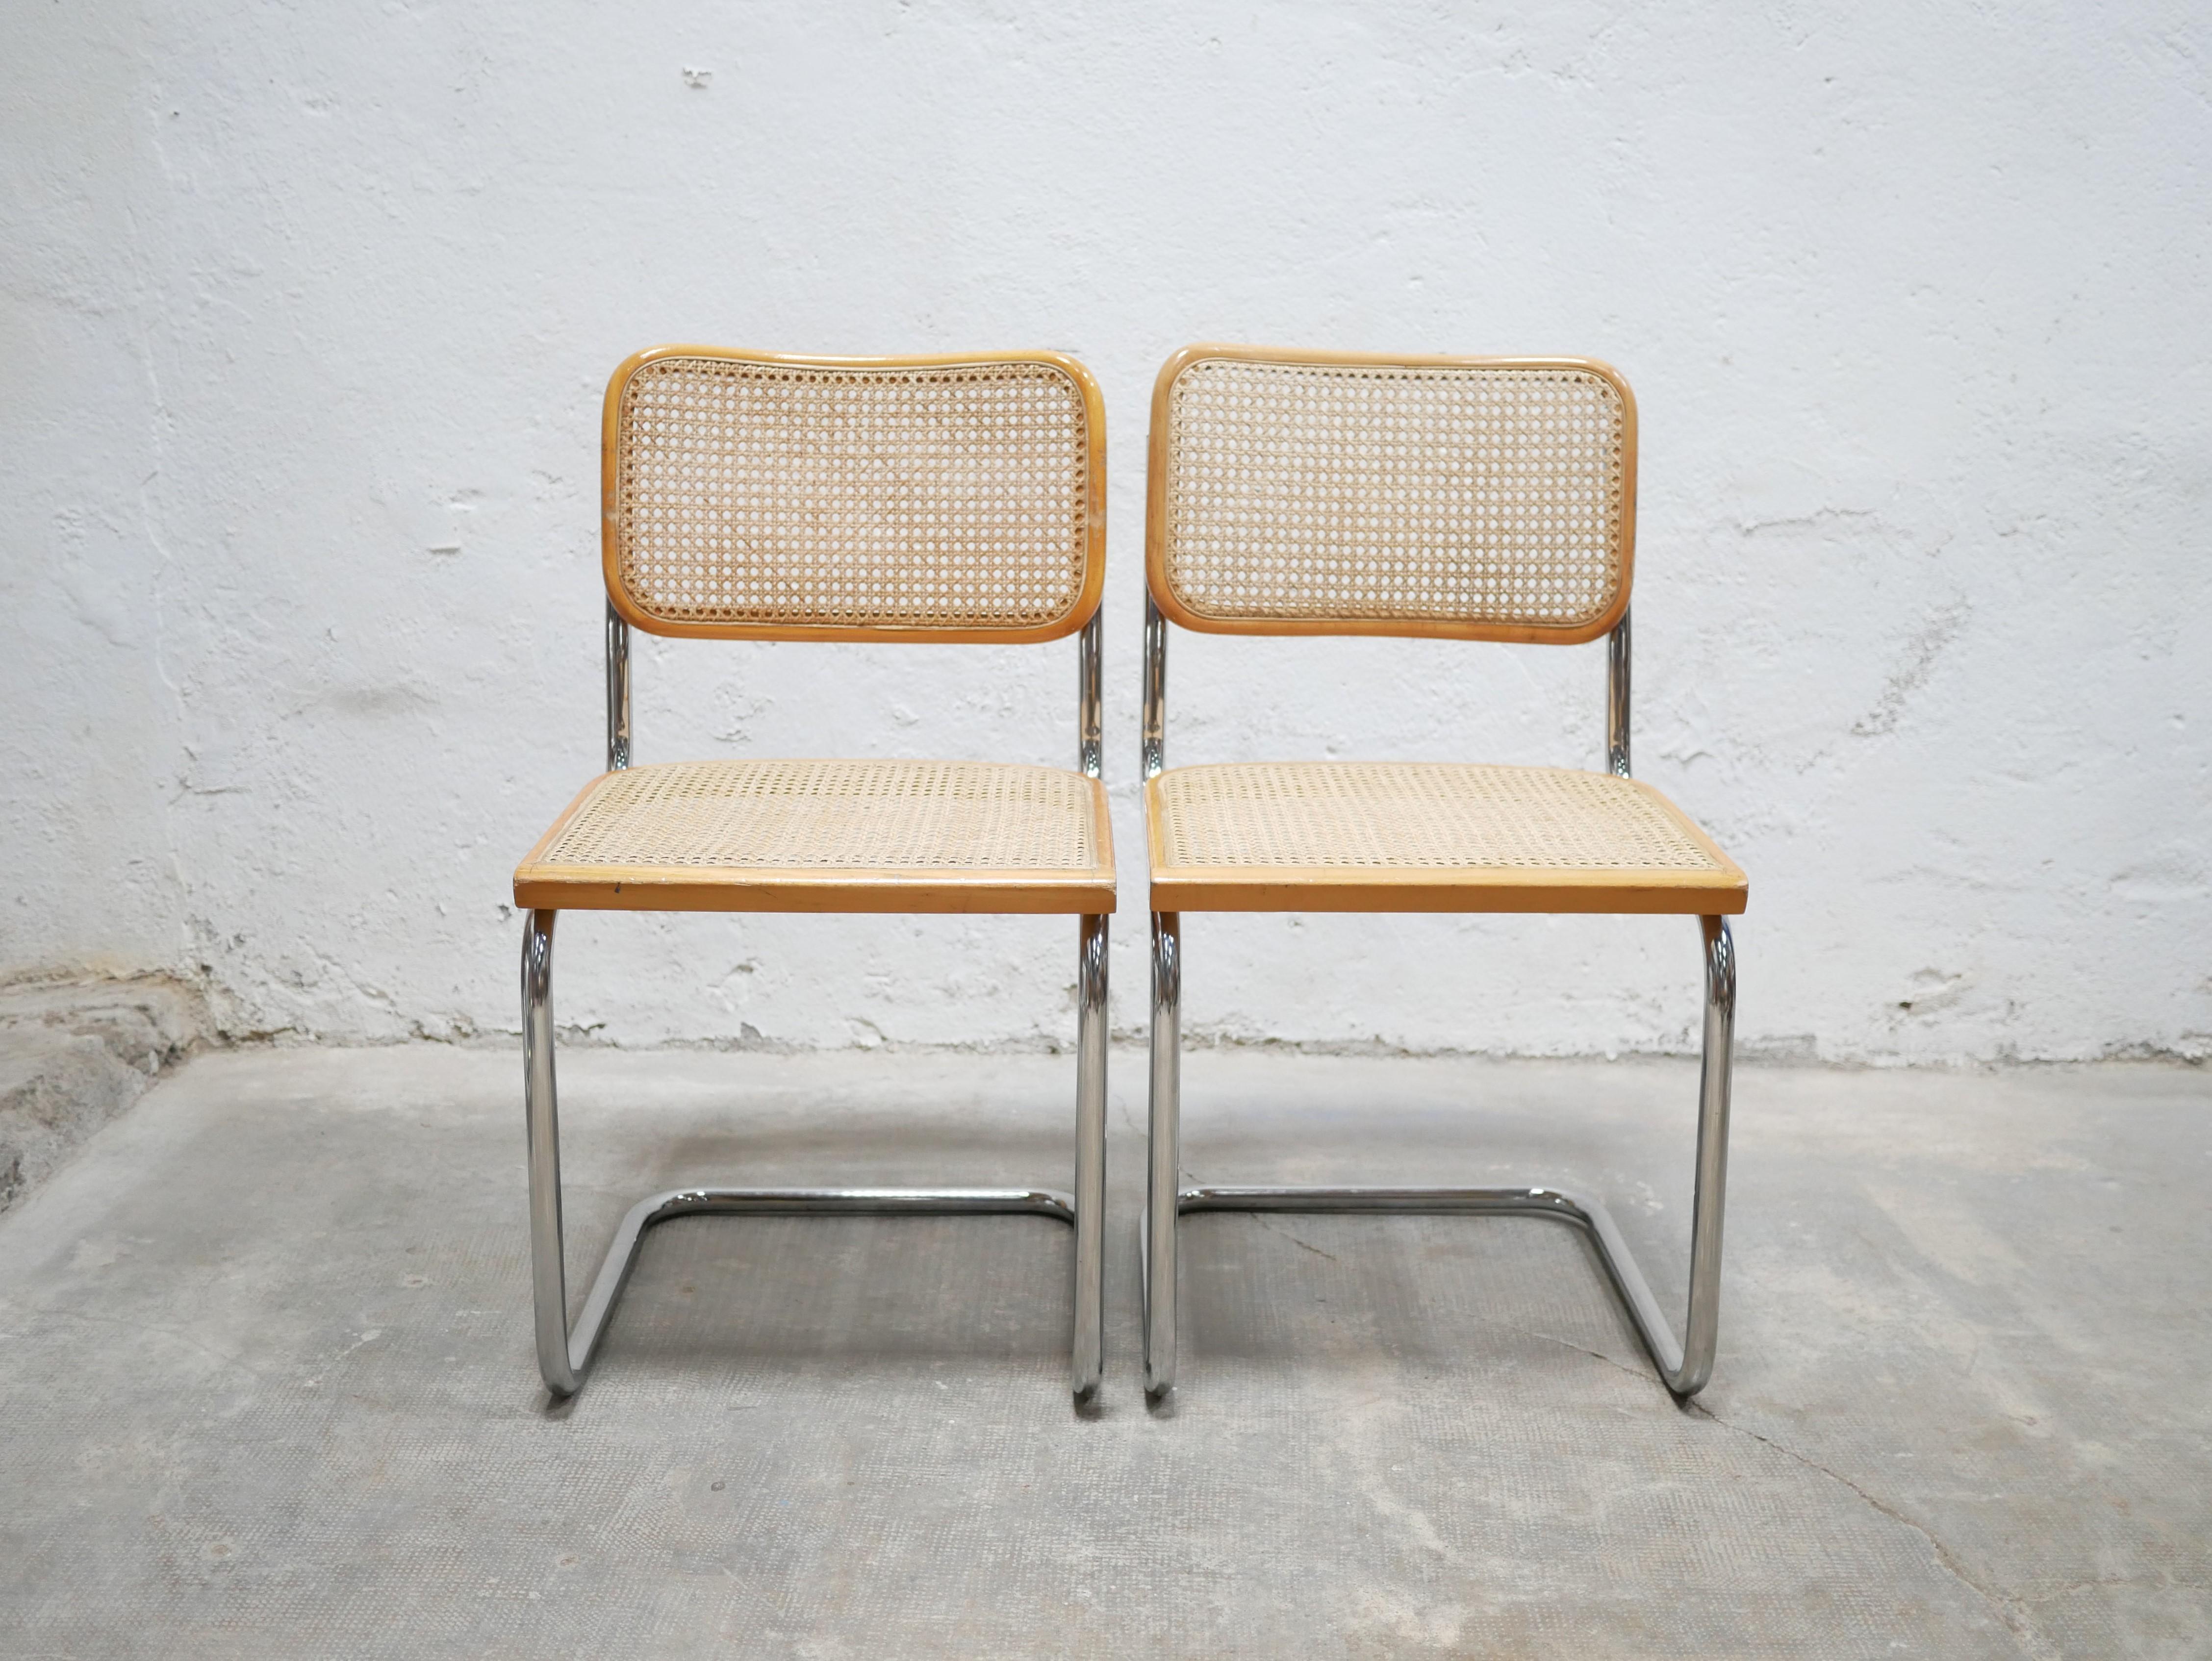 Chair designed by Marcel Breuer, model B32, from the 70s.

Tubular base in chromed steel, caned seat and backrest with natural color structure. This chair is an iconic piece in the history of modernism and Bauhaus.

With its timeless design, its